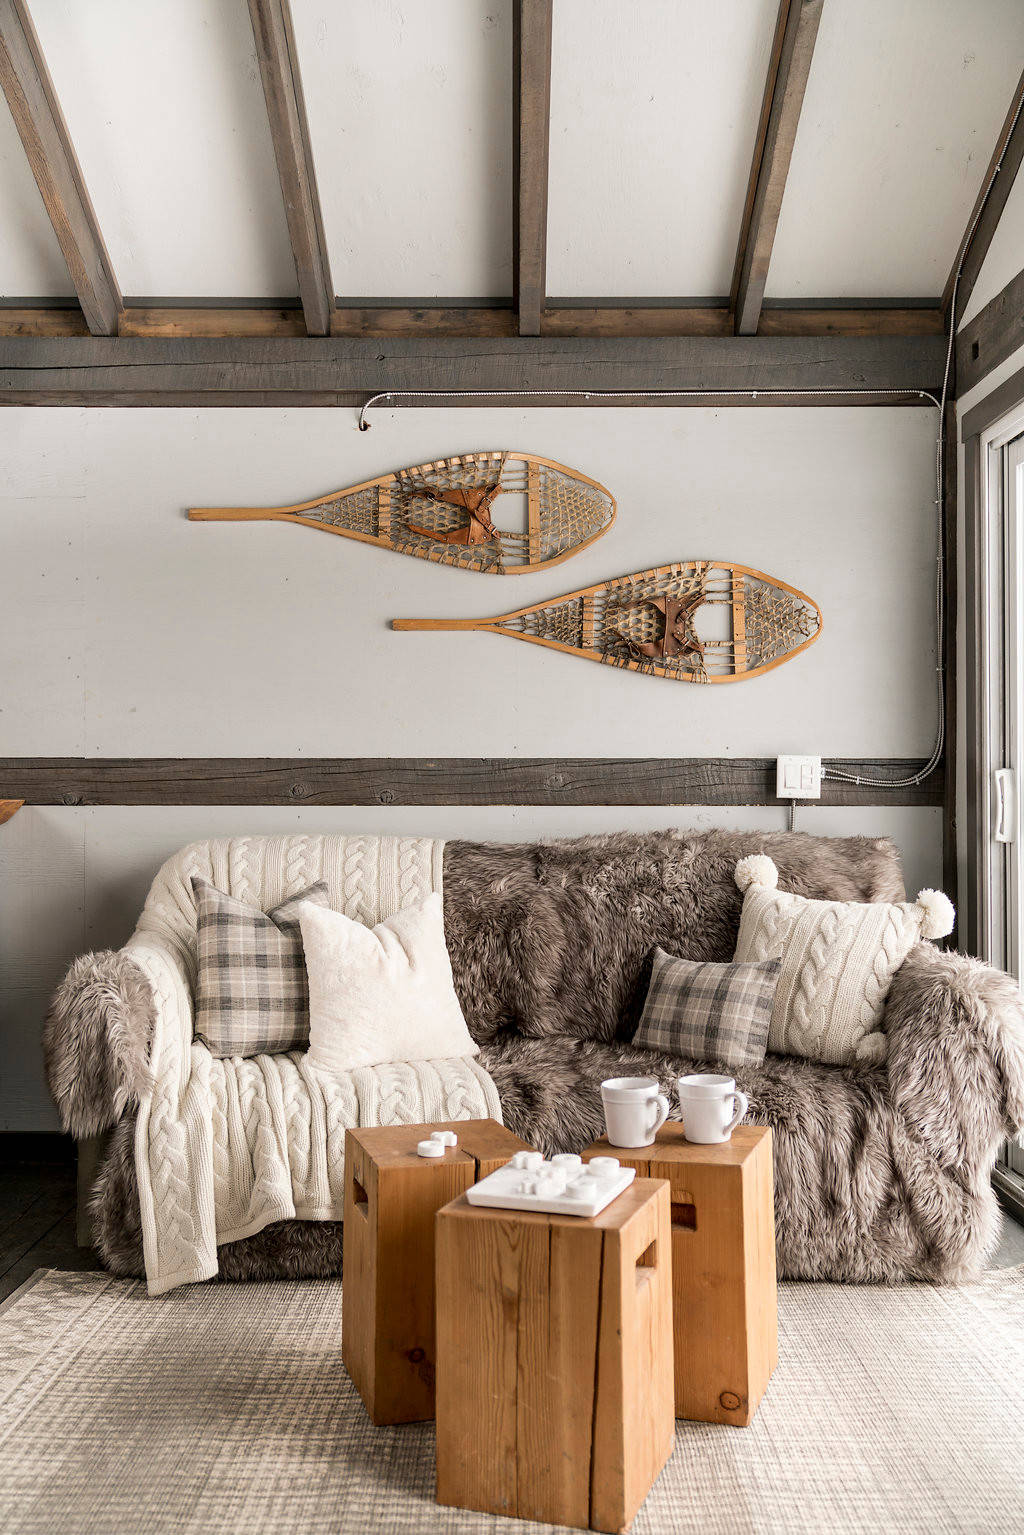 Cozy interior with plush sofa, wooden side tables, and snowshoes on